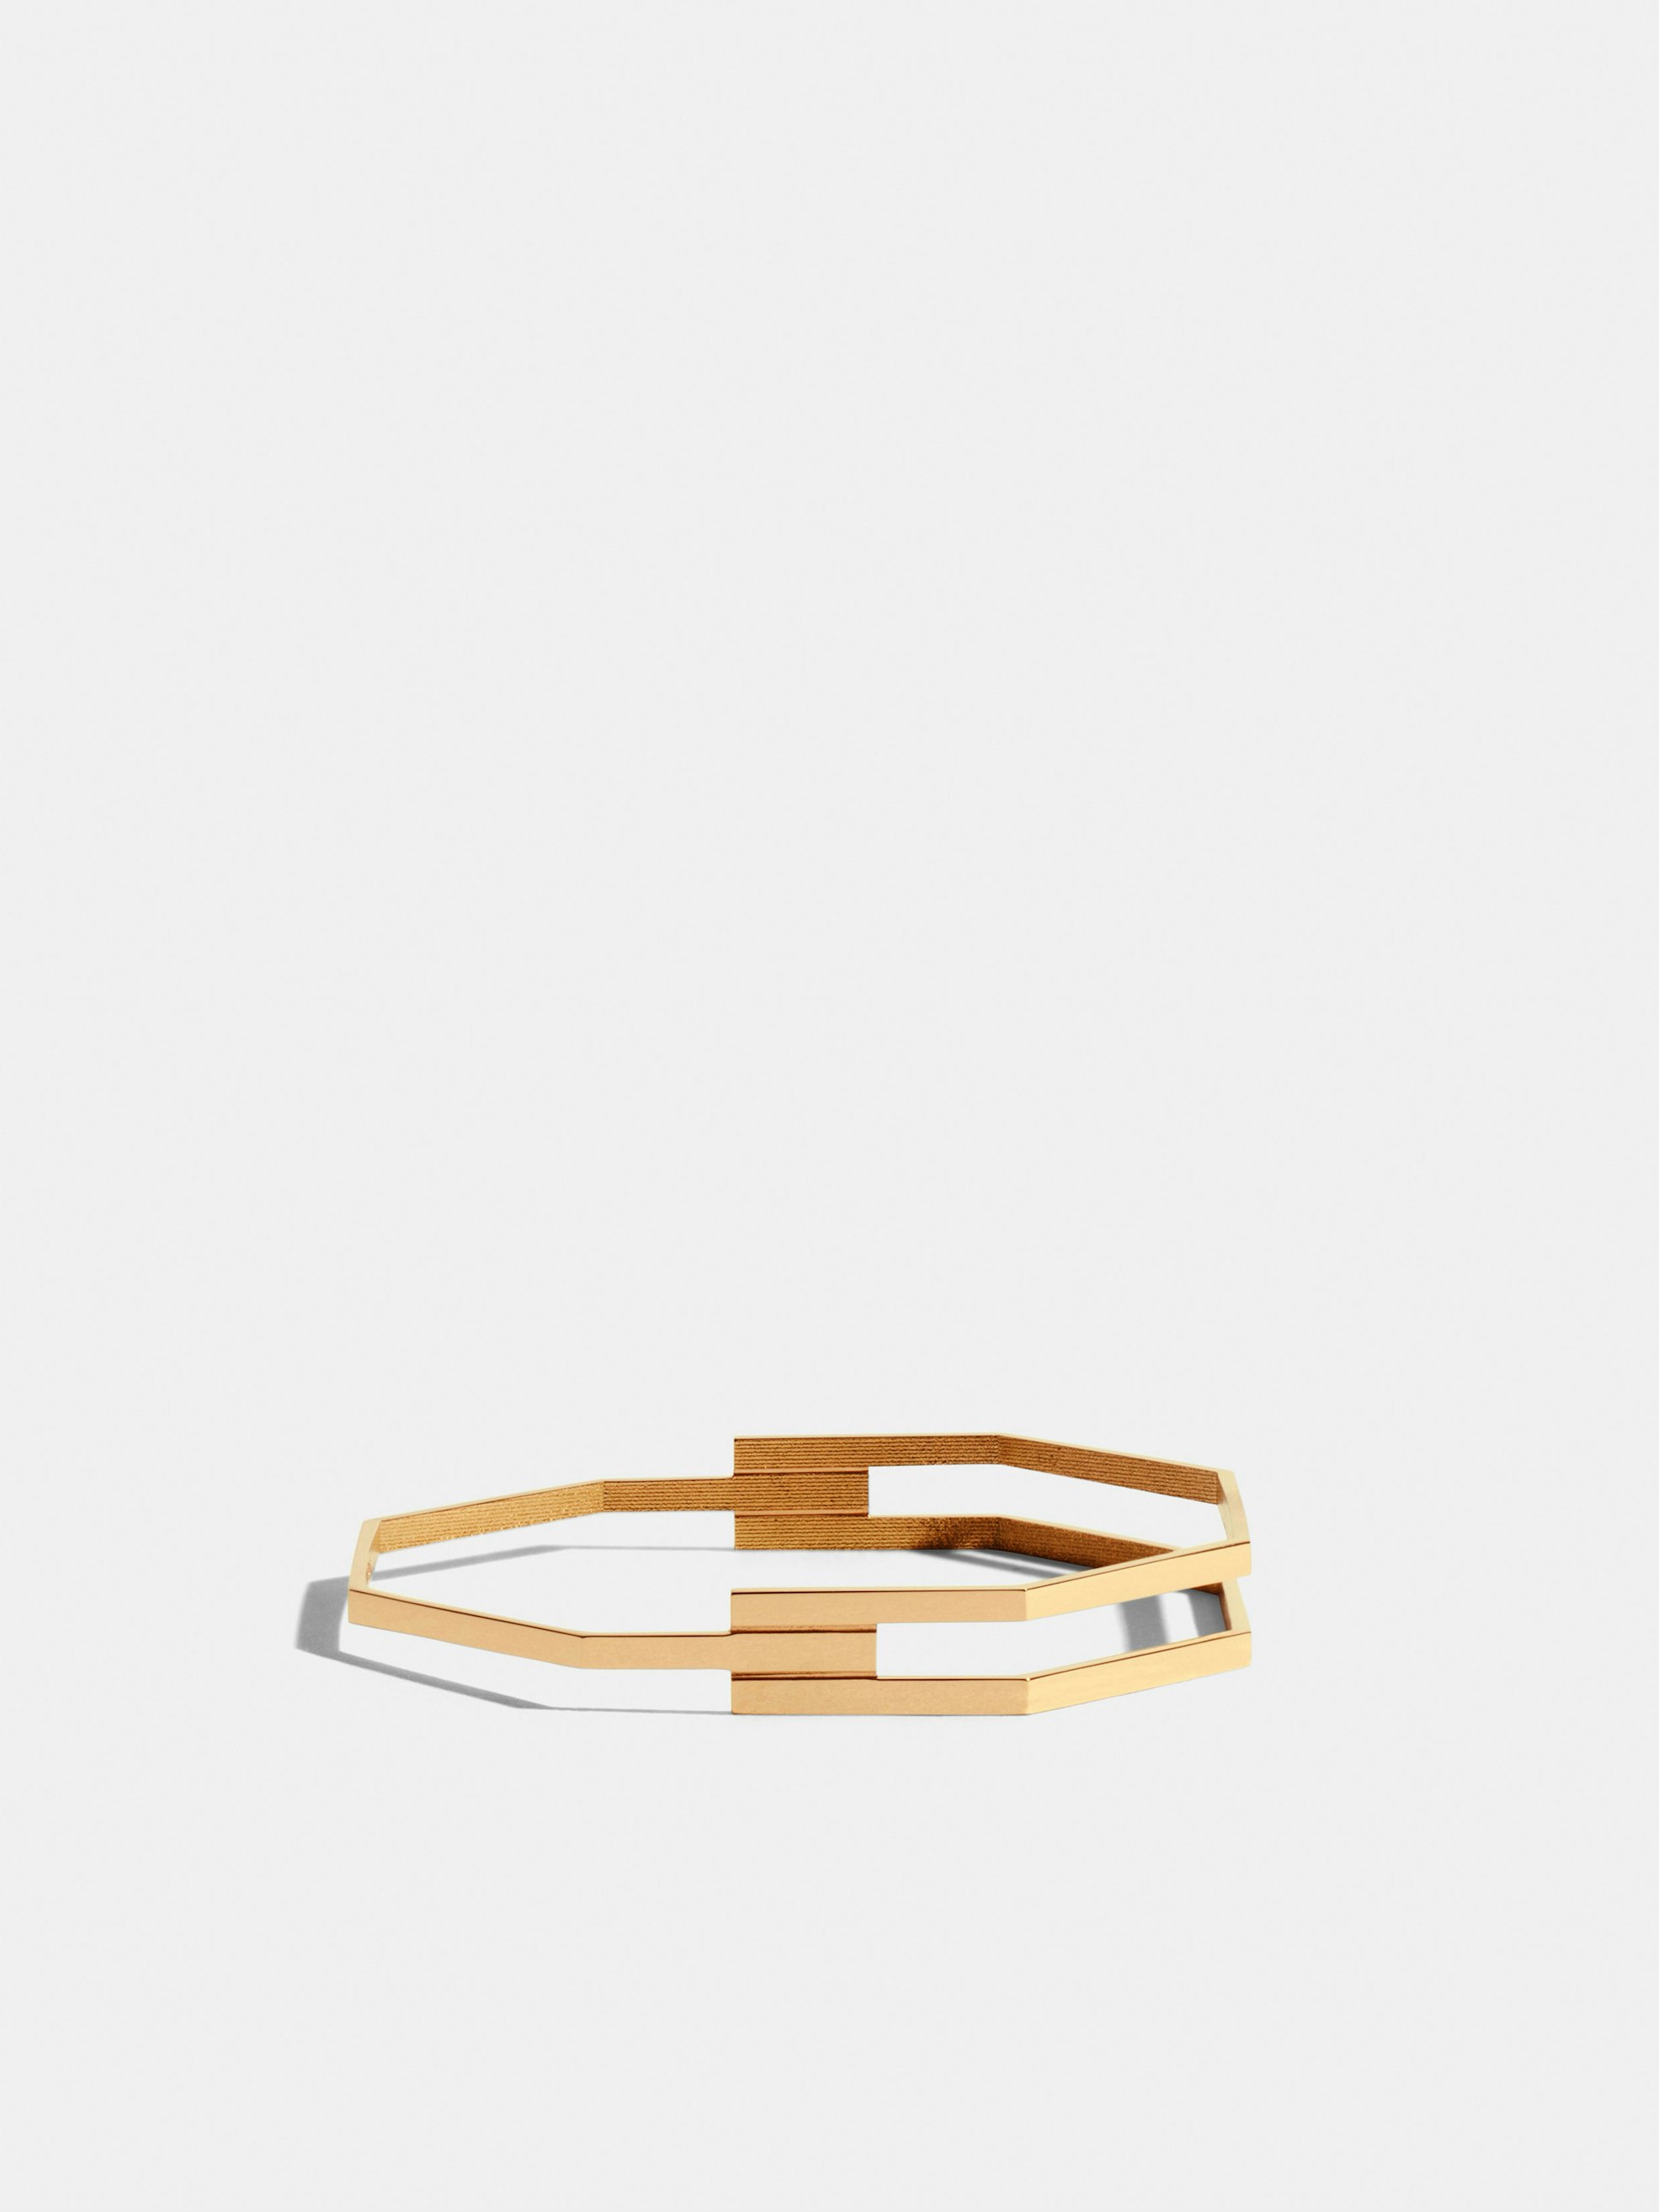 Octogone triple bangle in 18k Fairmined ethical yellow gold